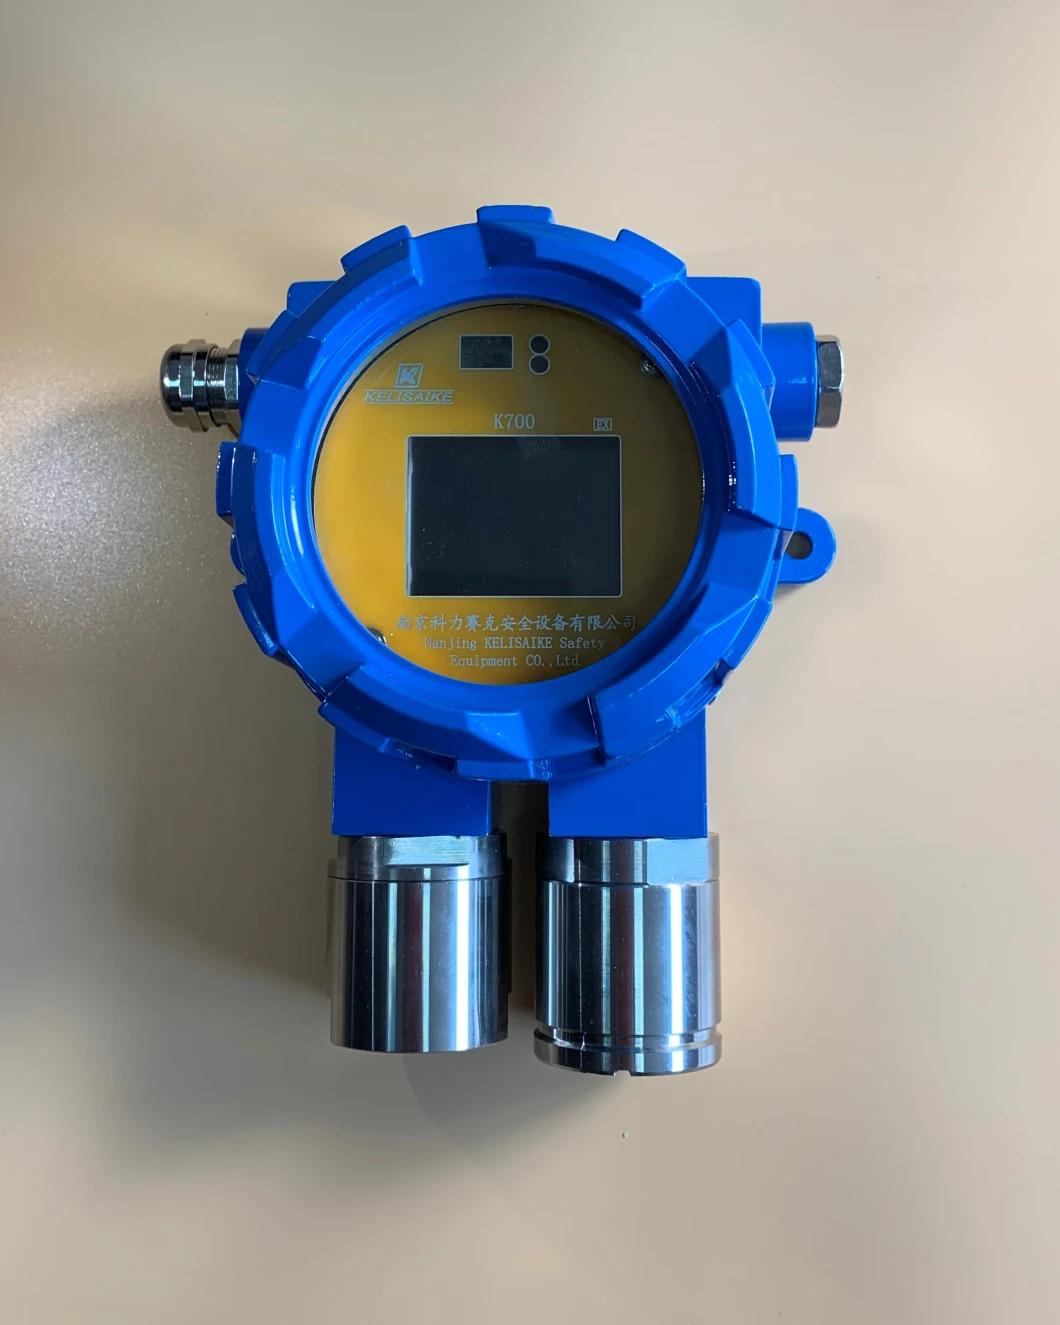 K700 Fixed Gas Sensor for Petrochemical Industry